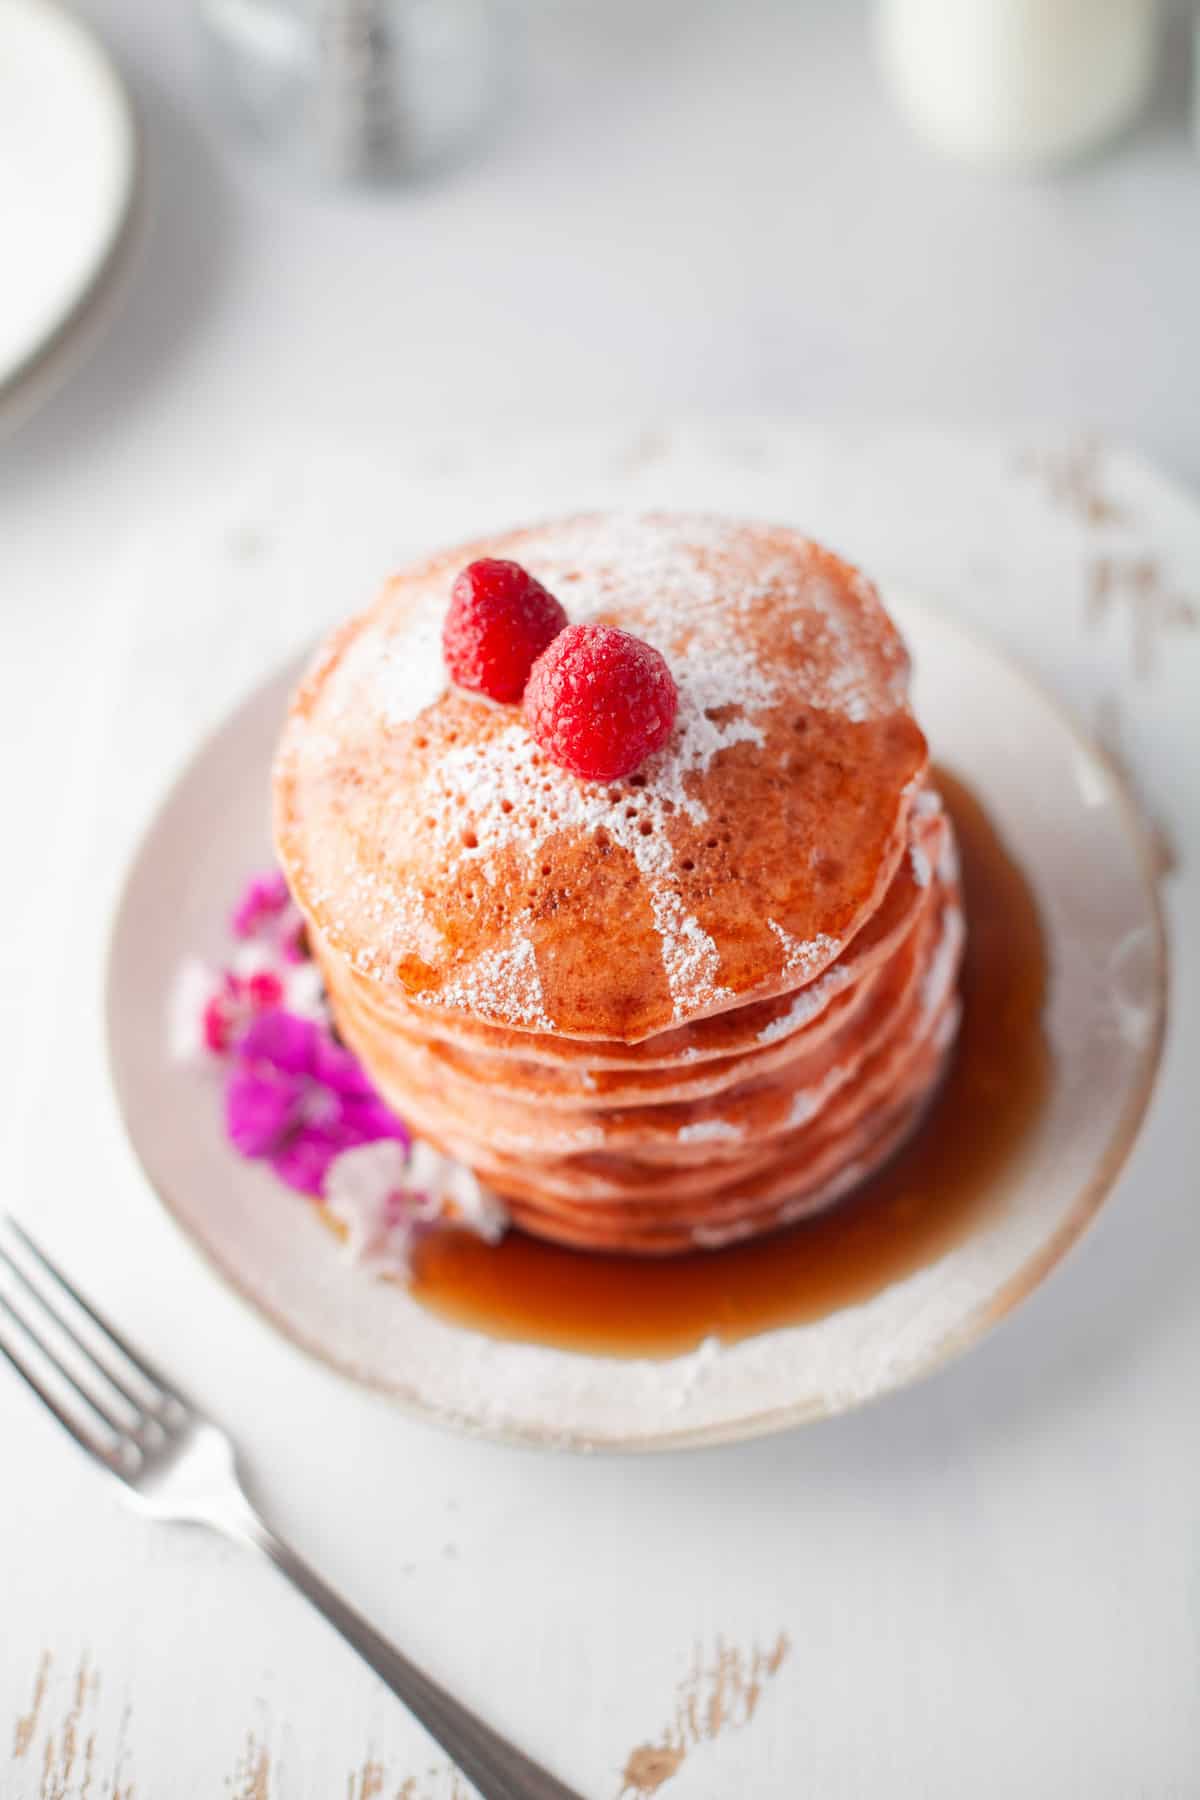 Beet pancakes topped with raspberries.